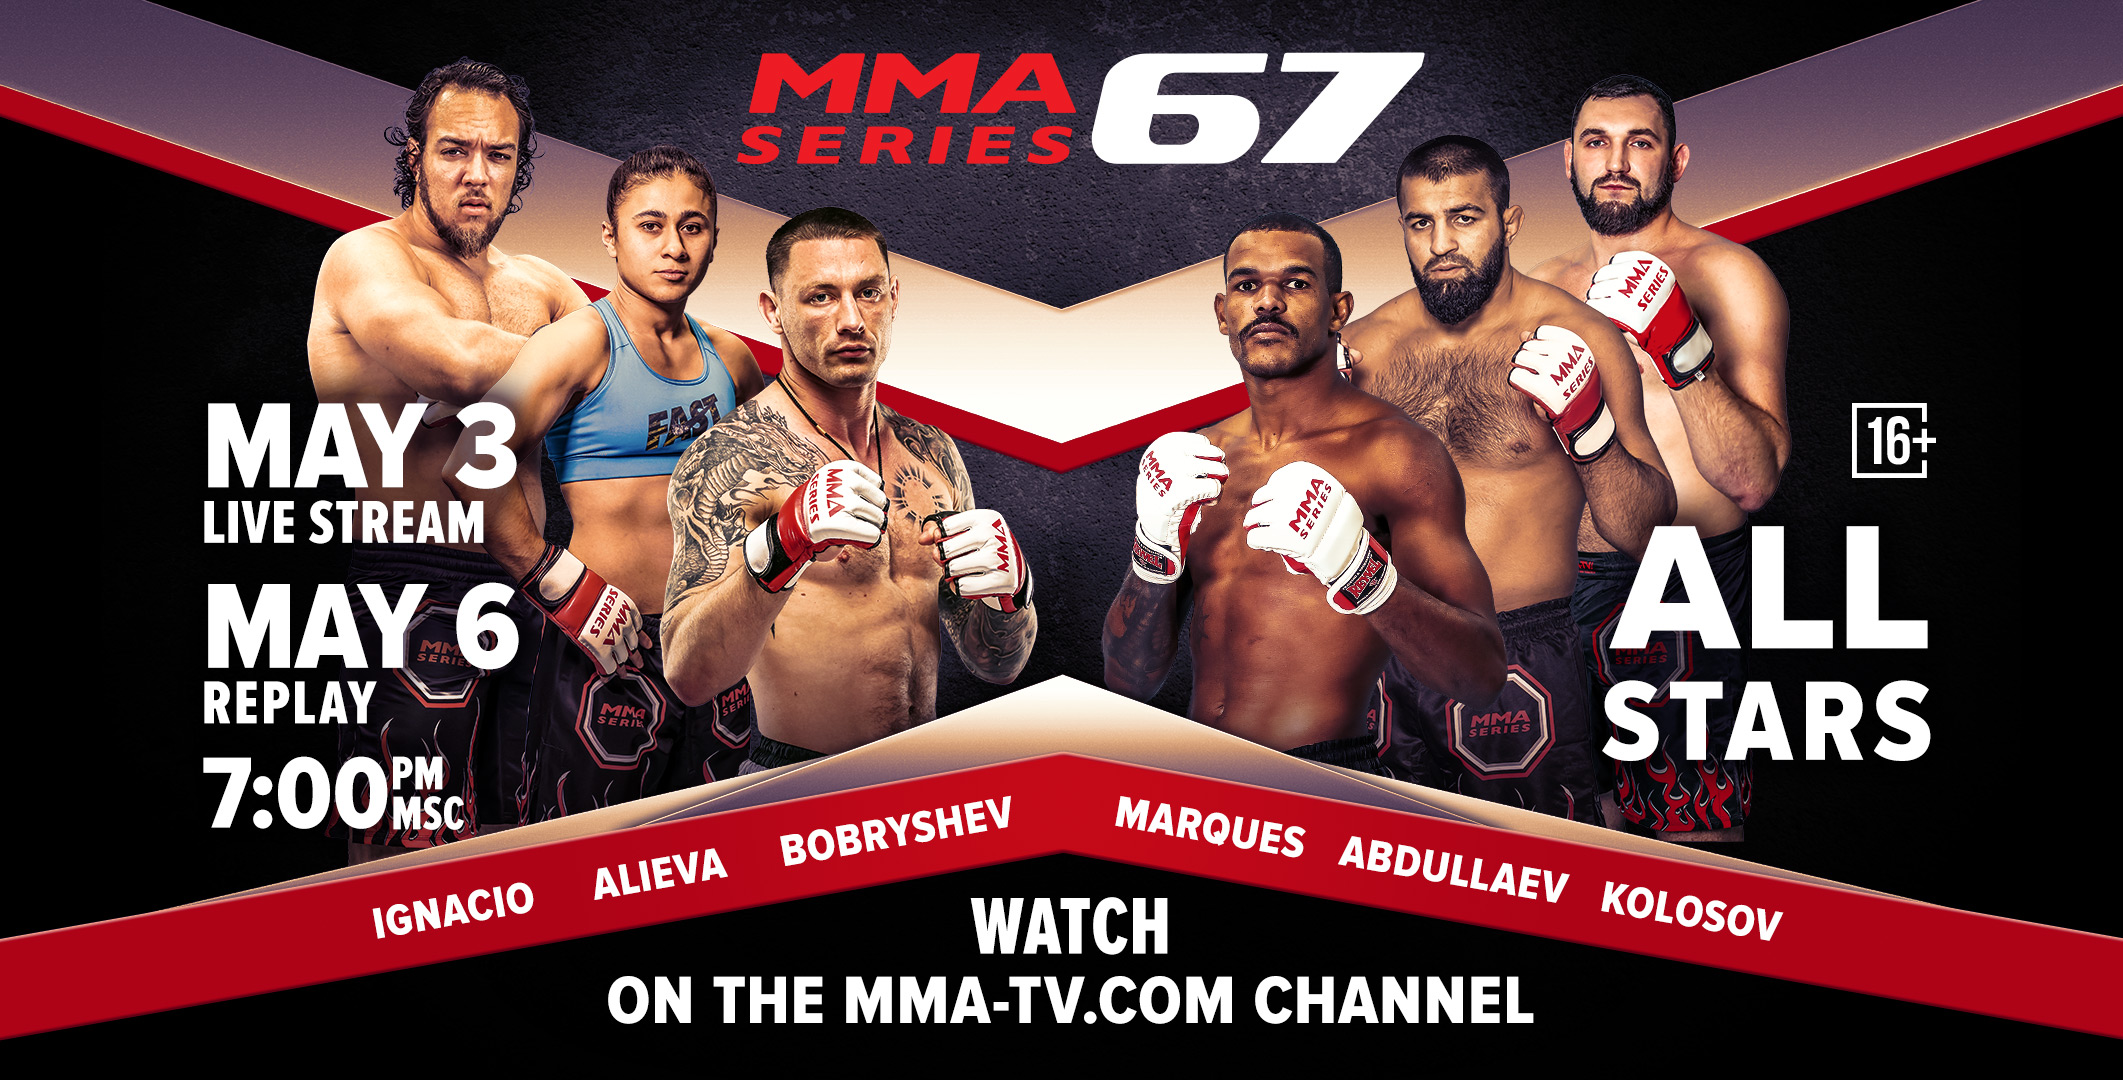 MMA Series-67 All stars card MMA Series official website